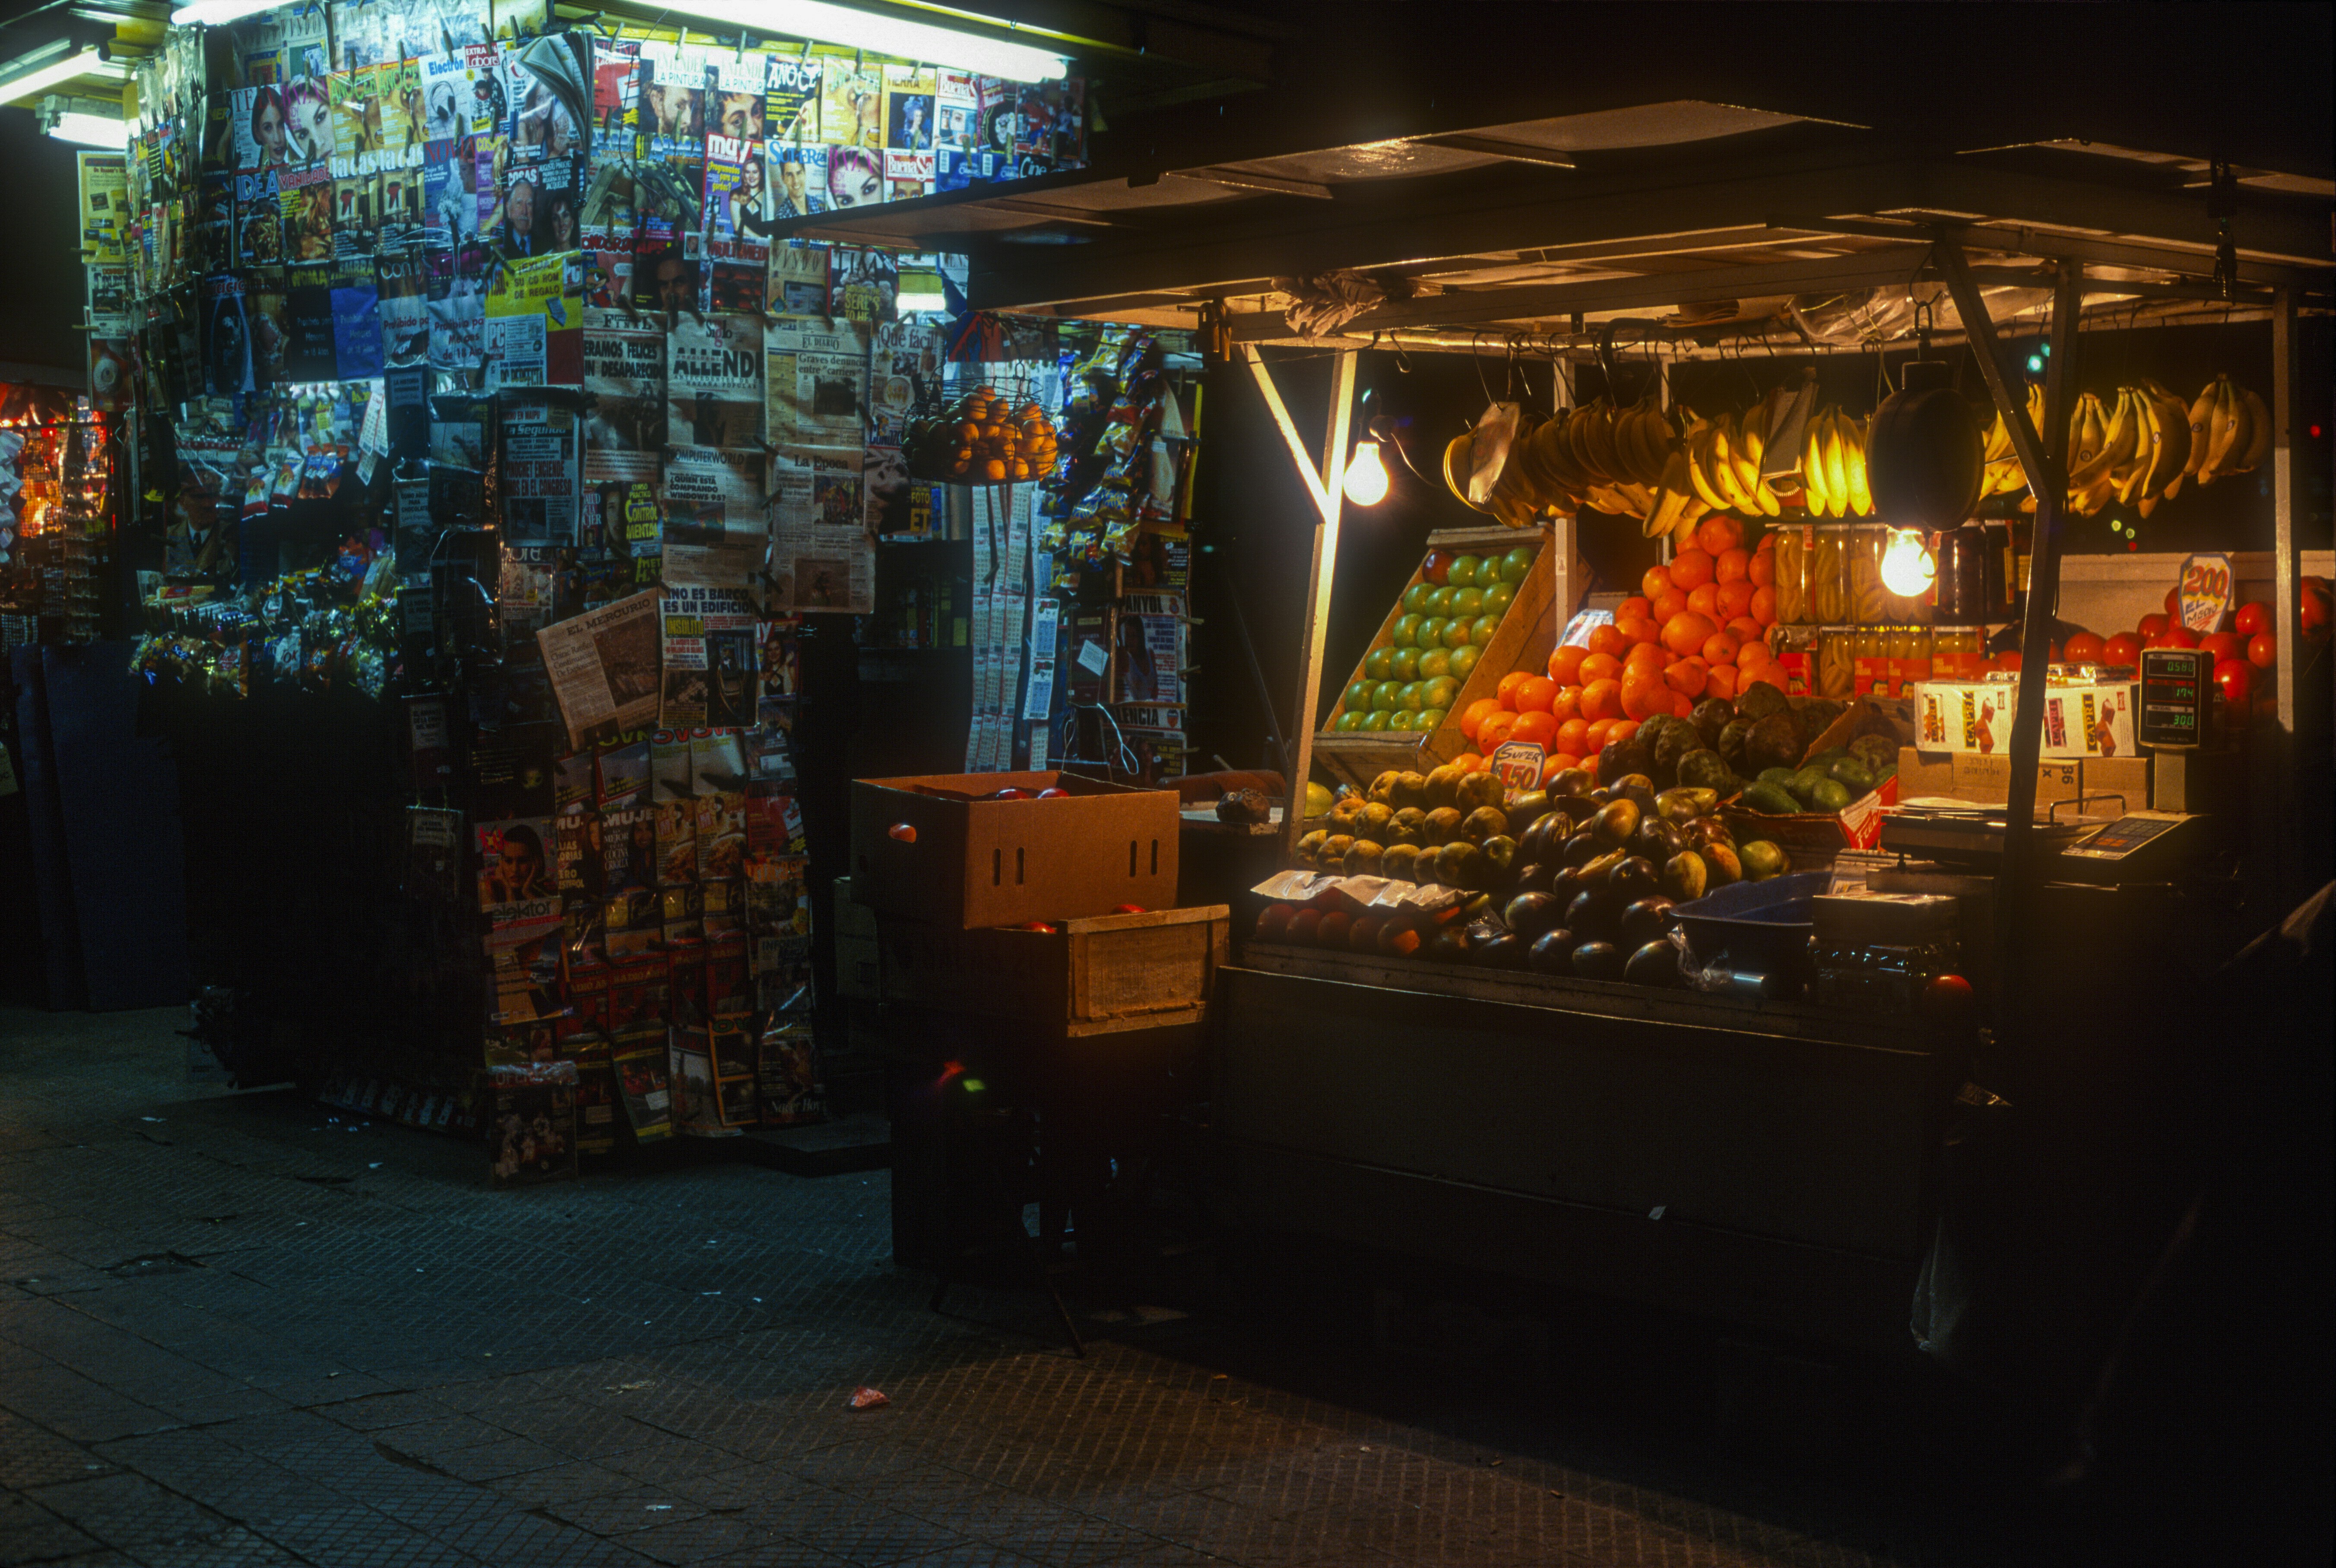 A cool little night market and news stand in Santiago. -- Shot on slide film, Canon A2E, 1995, scanned on Nikon CoolScan 4000